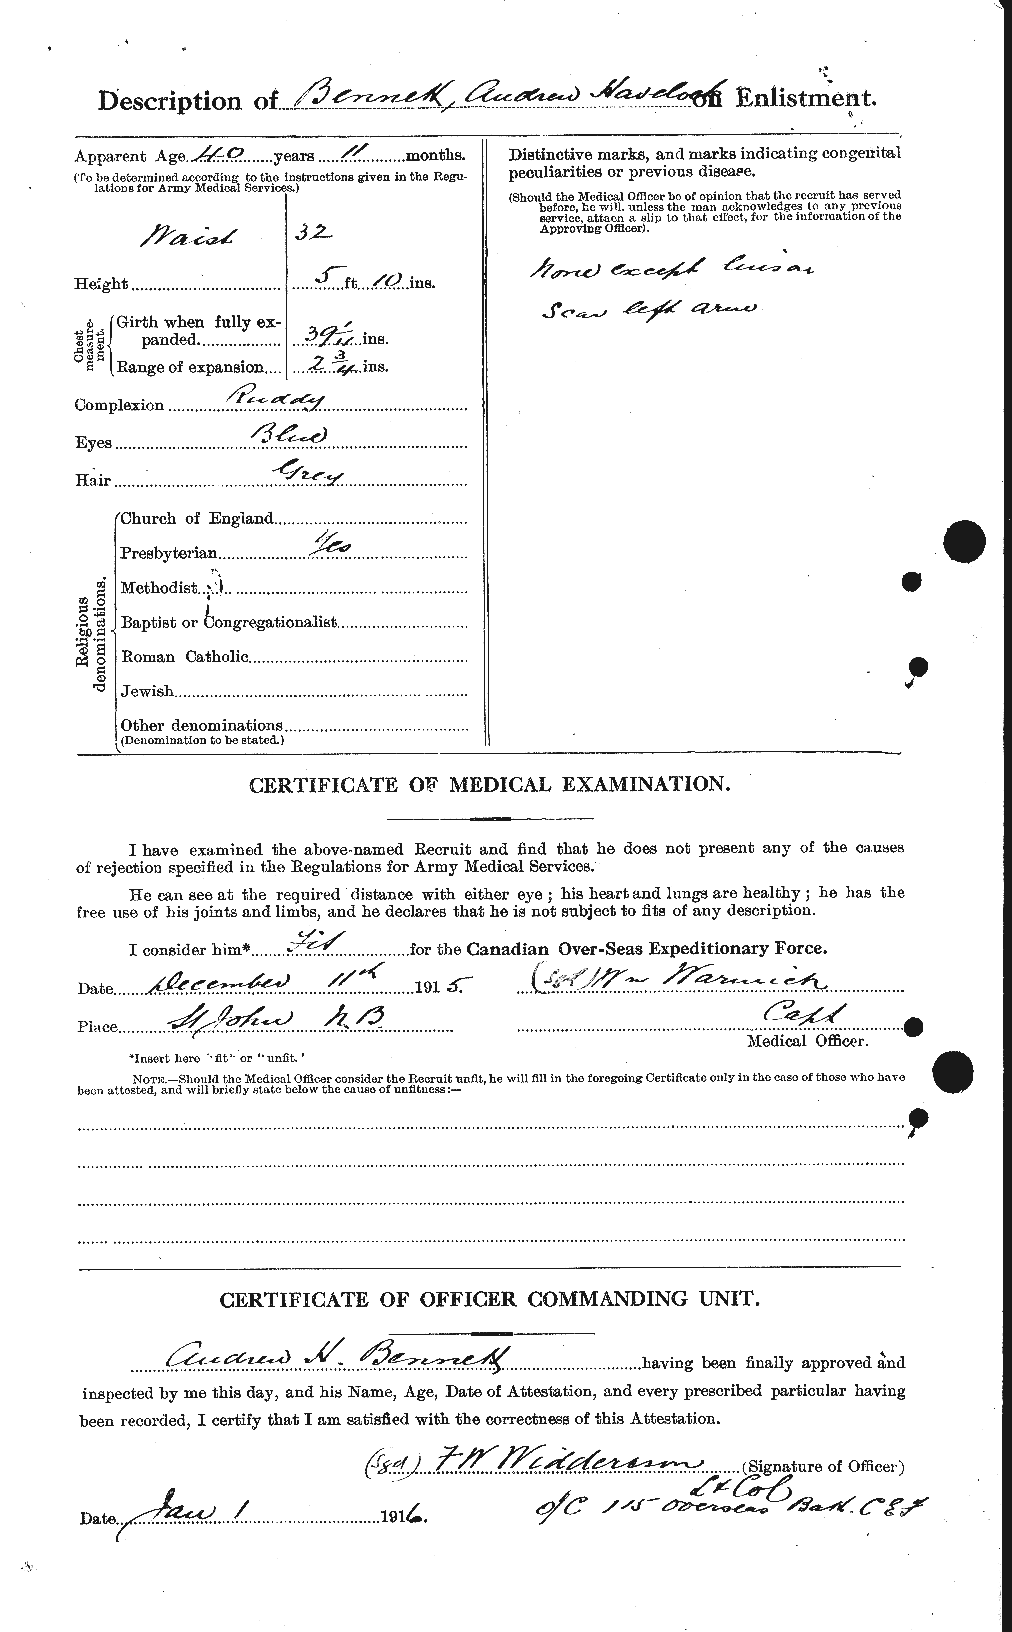 Personnel Records of the First World War - CEF 233323b